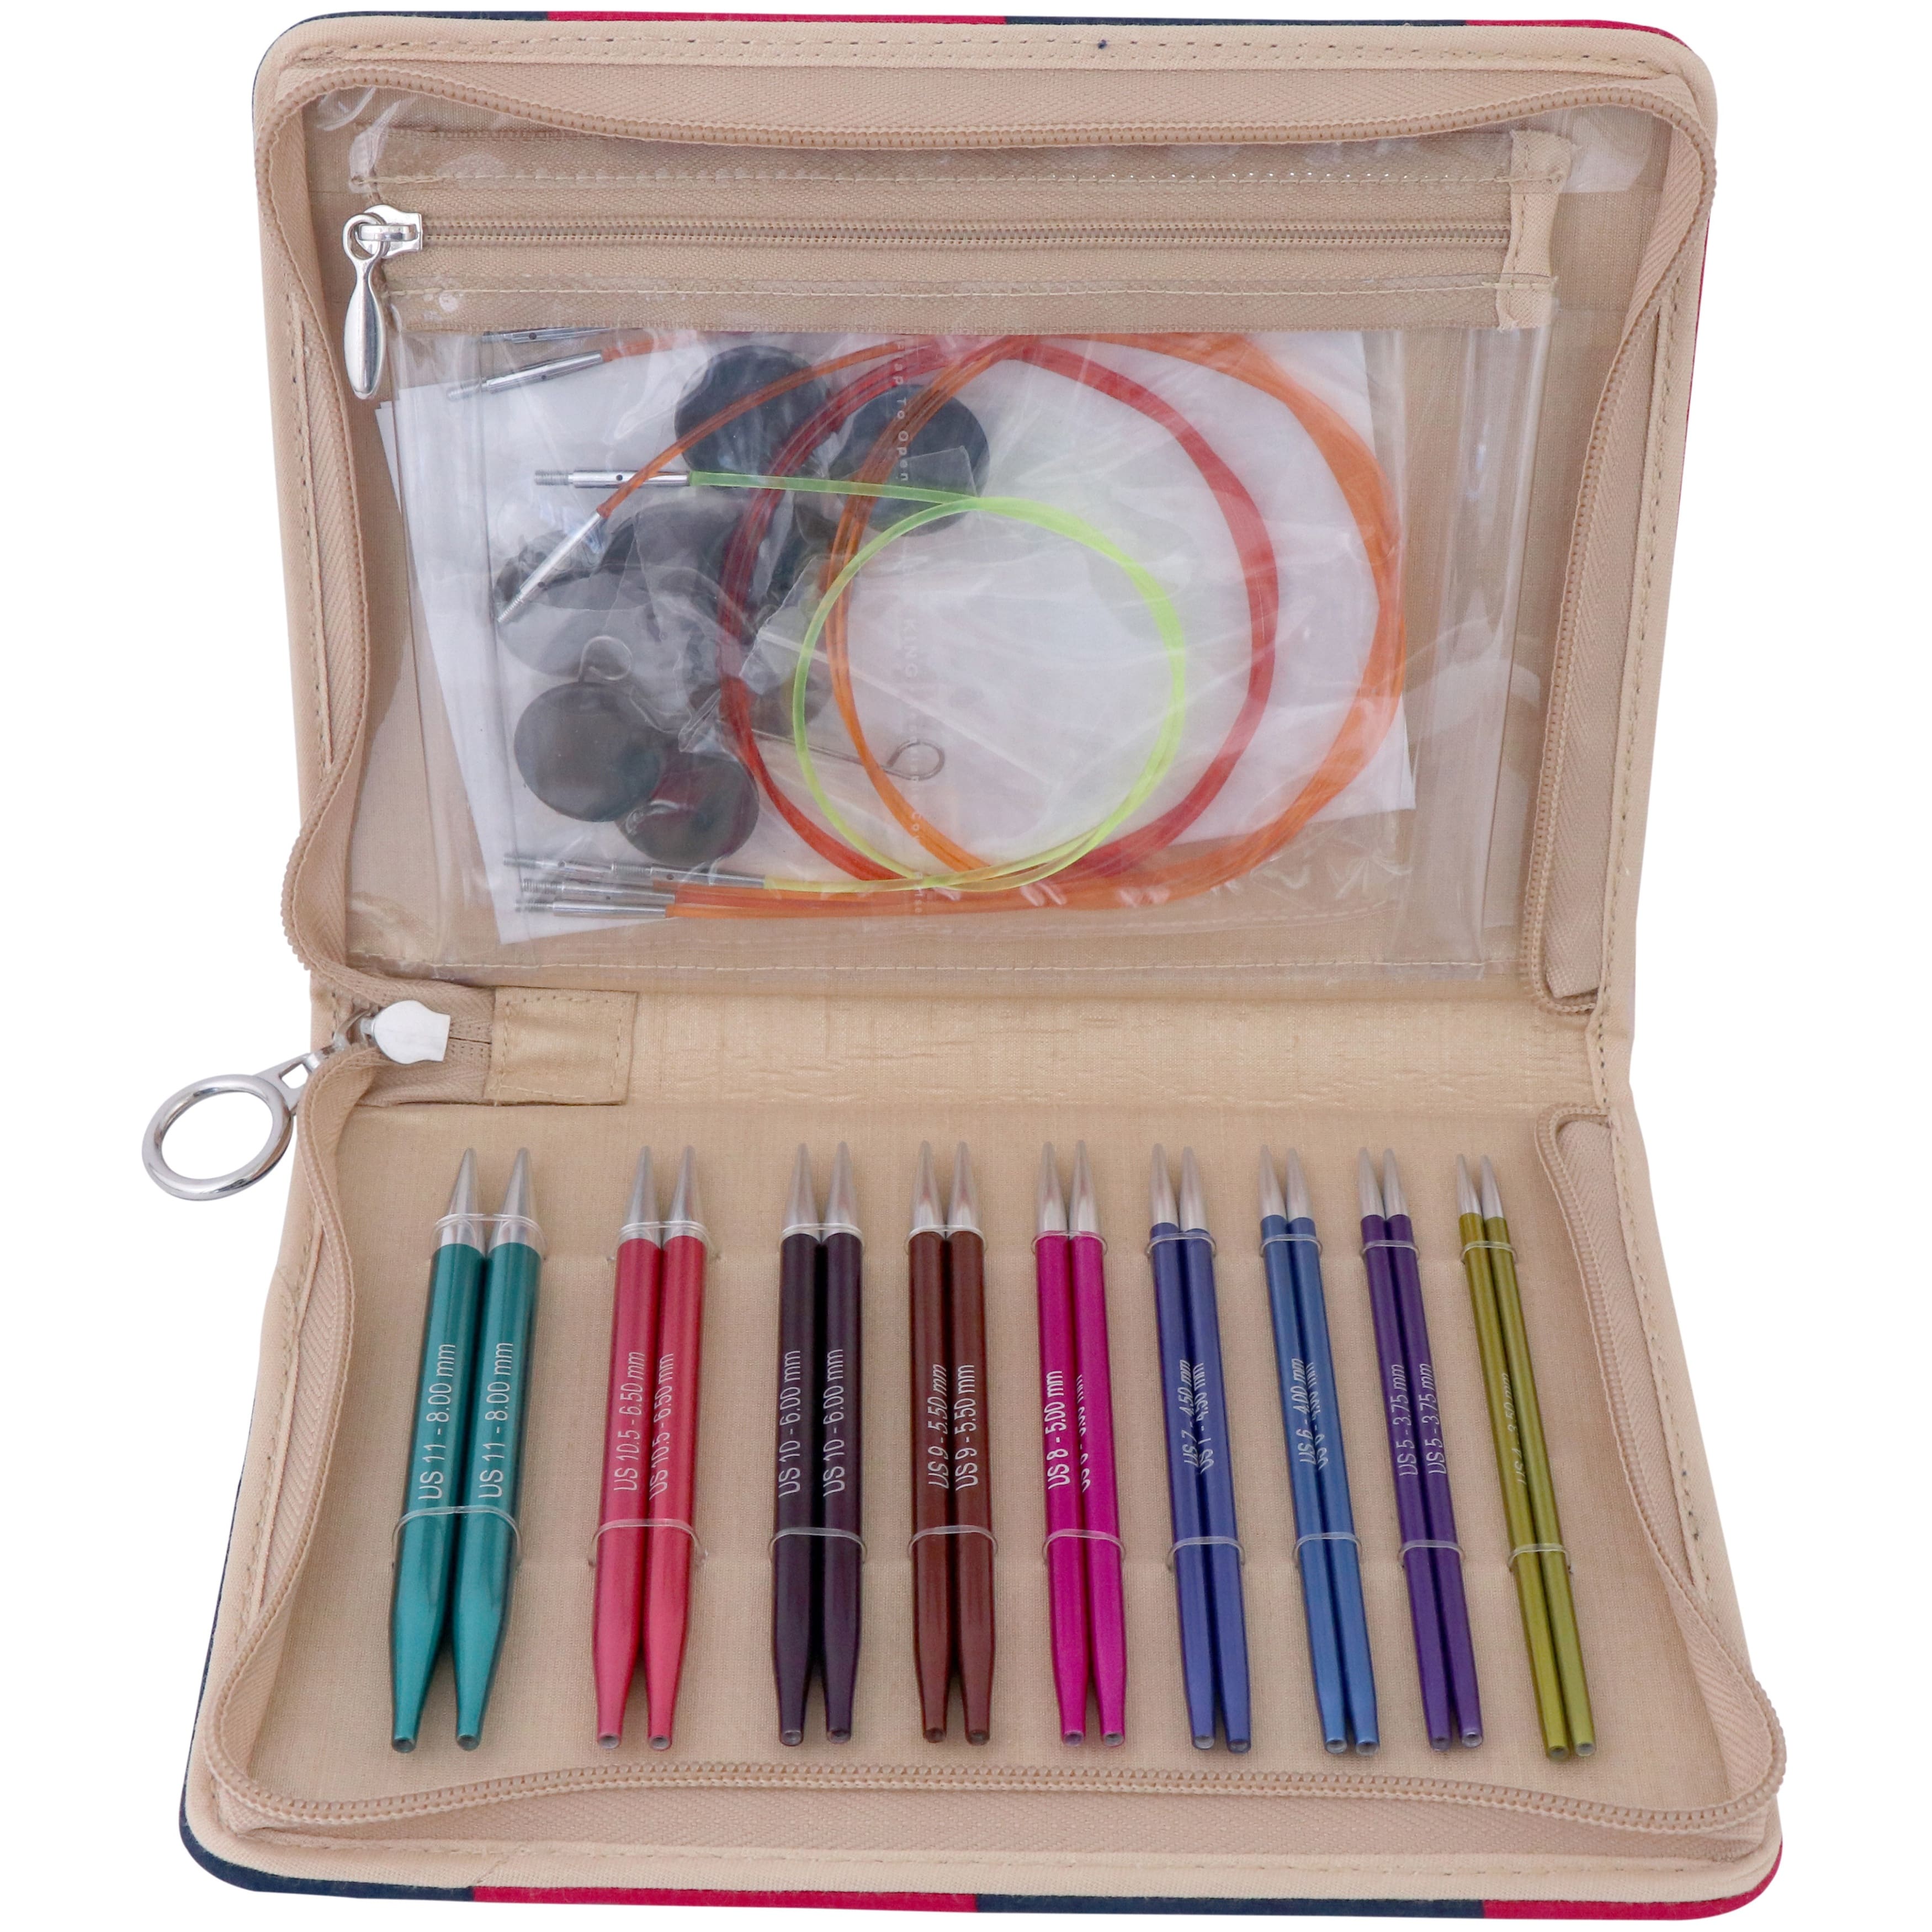 The Royale Interchangeable Knitting Needle Set Luxury Collection by Kn in  2023